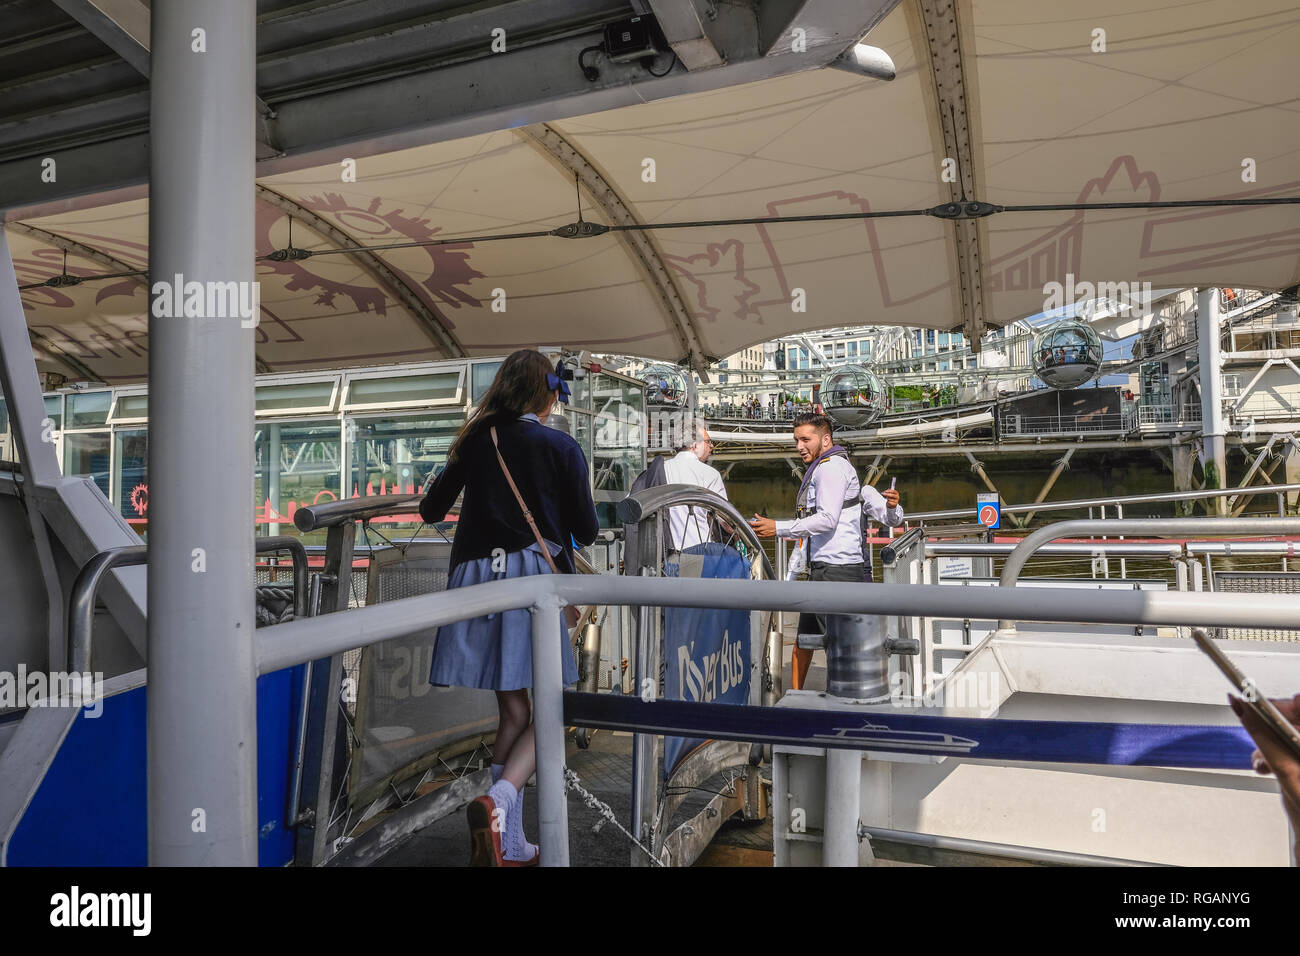 Waterloo, London, UK - June 8, 2018: People disembarking from clipper at its landing place at Waterloo Pier Stock Photo